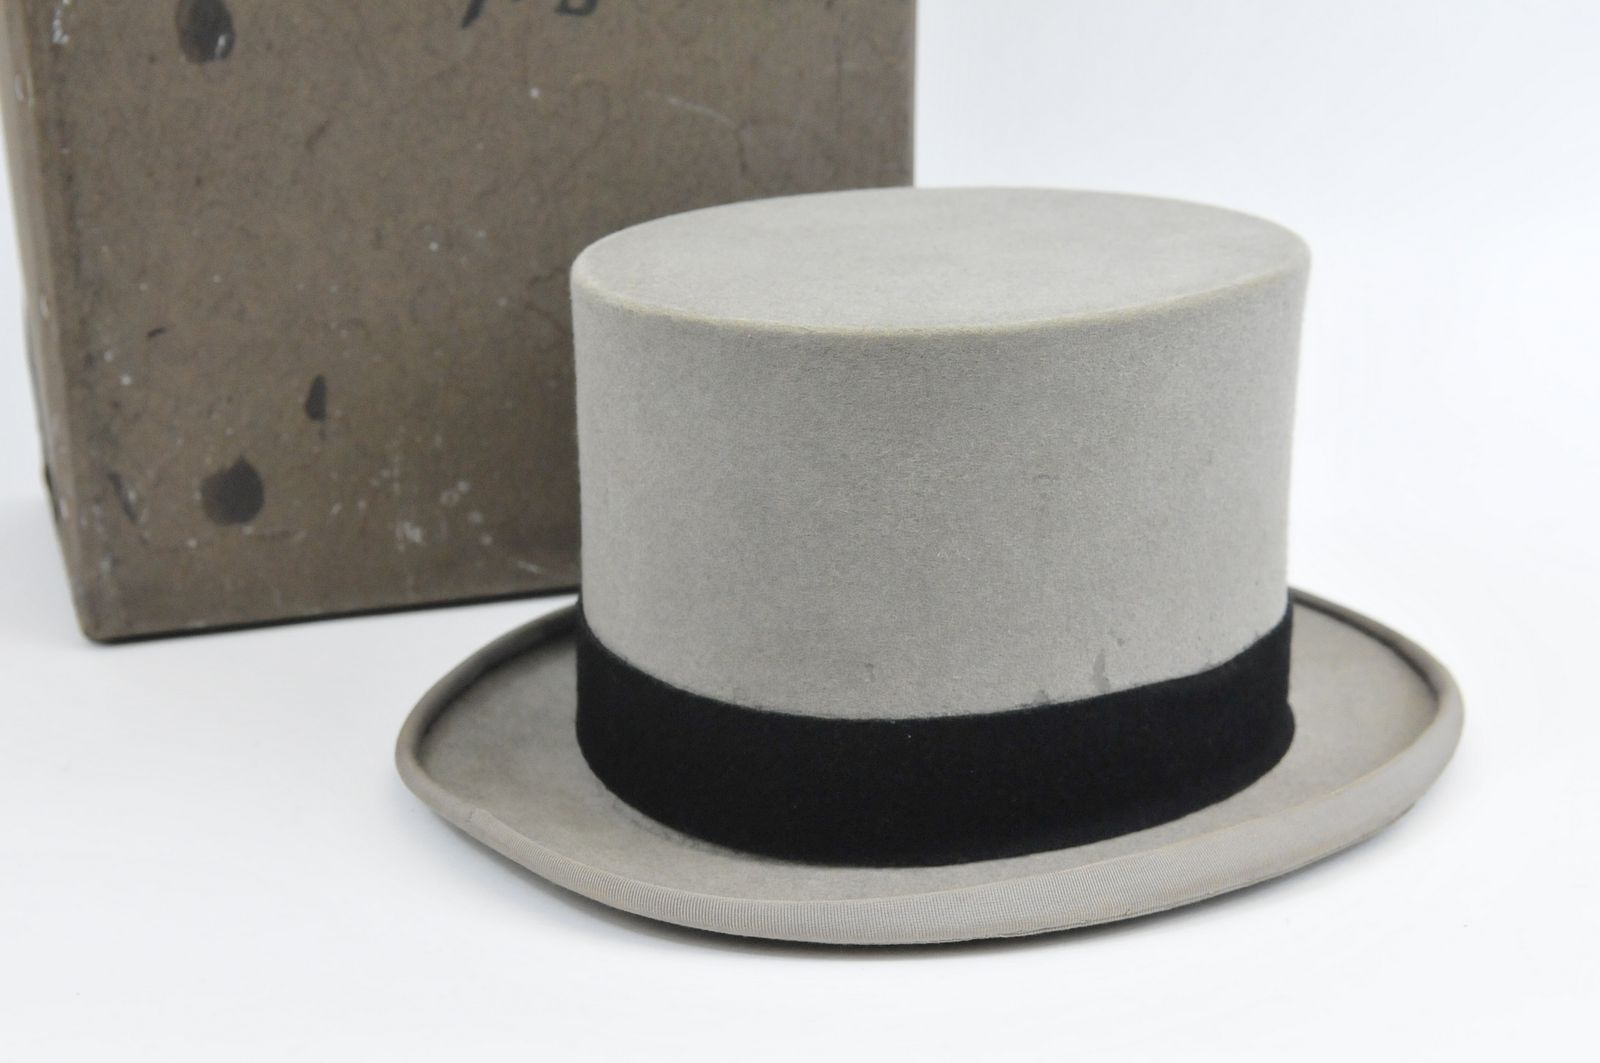 A fine quality Charles Scotney top hat of grey colour with black band size 7/1.8, in mint